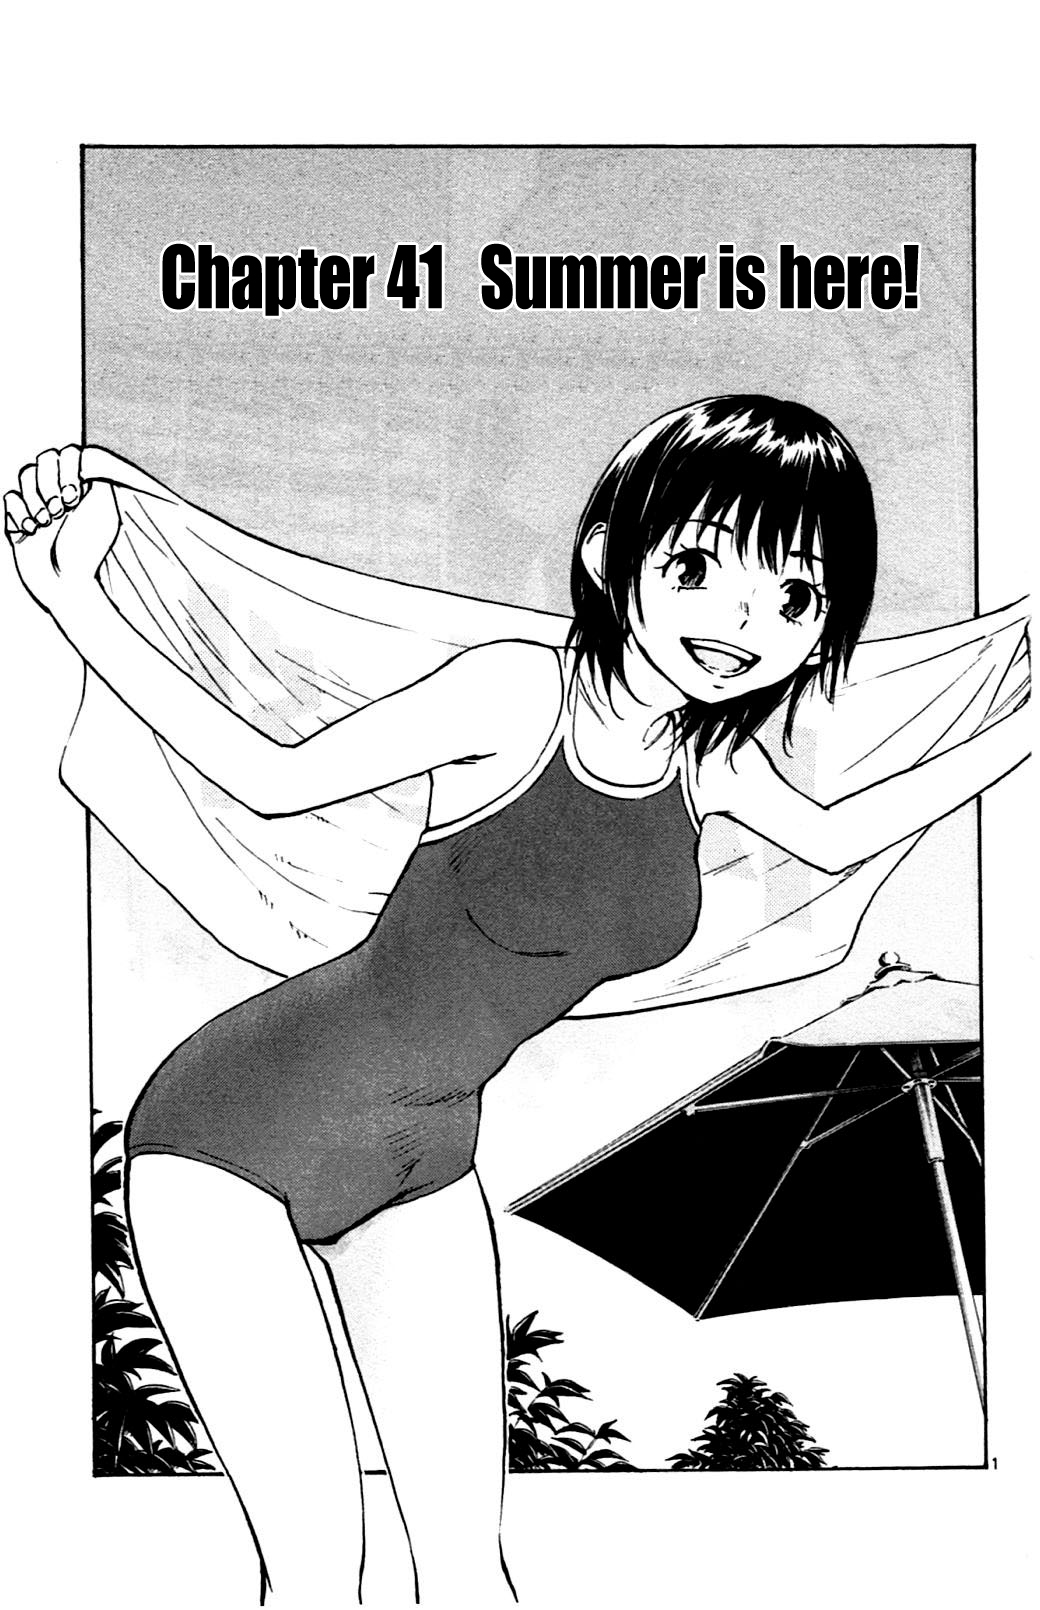 BE BLUES ~Ao ni nare~ Vol. 5 Ch. 41 Summer Is Here!